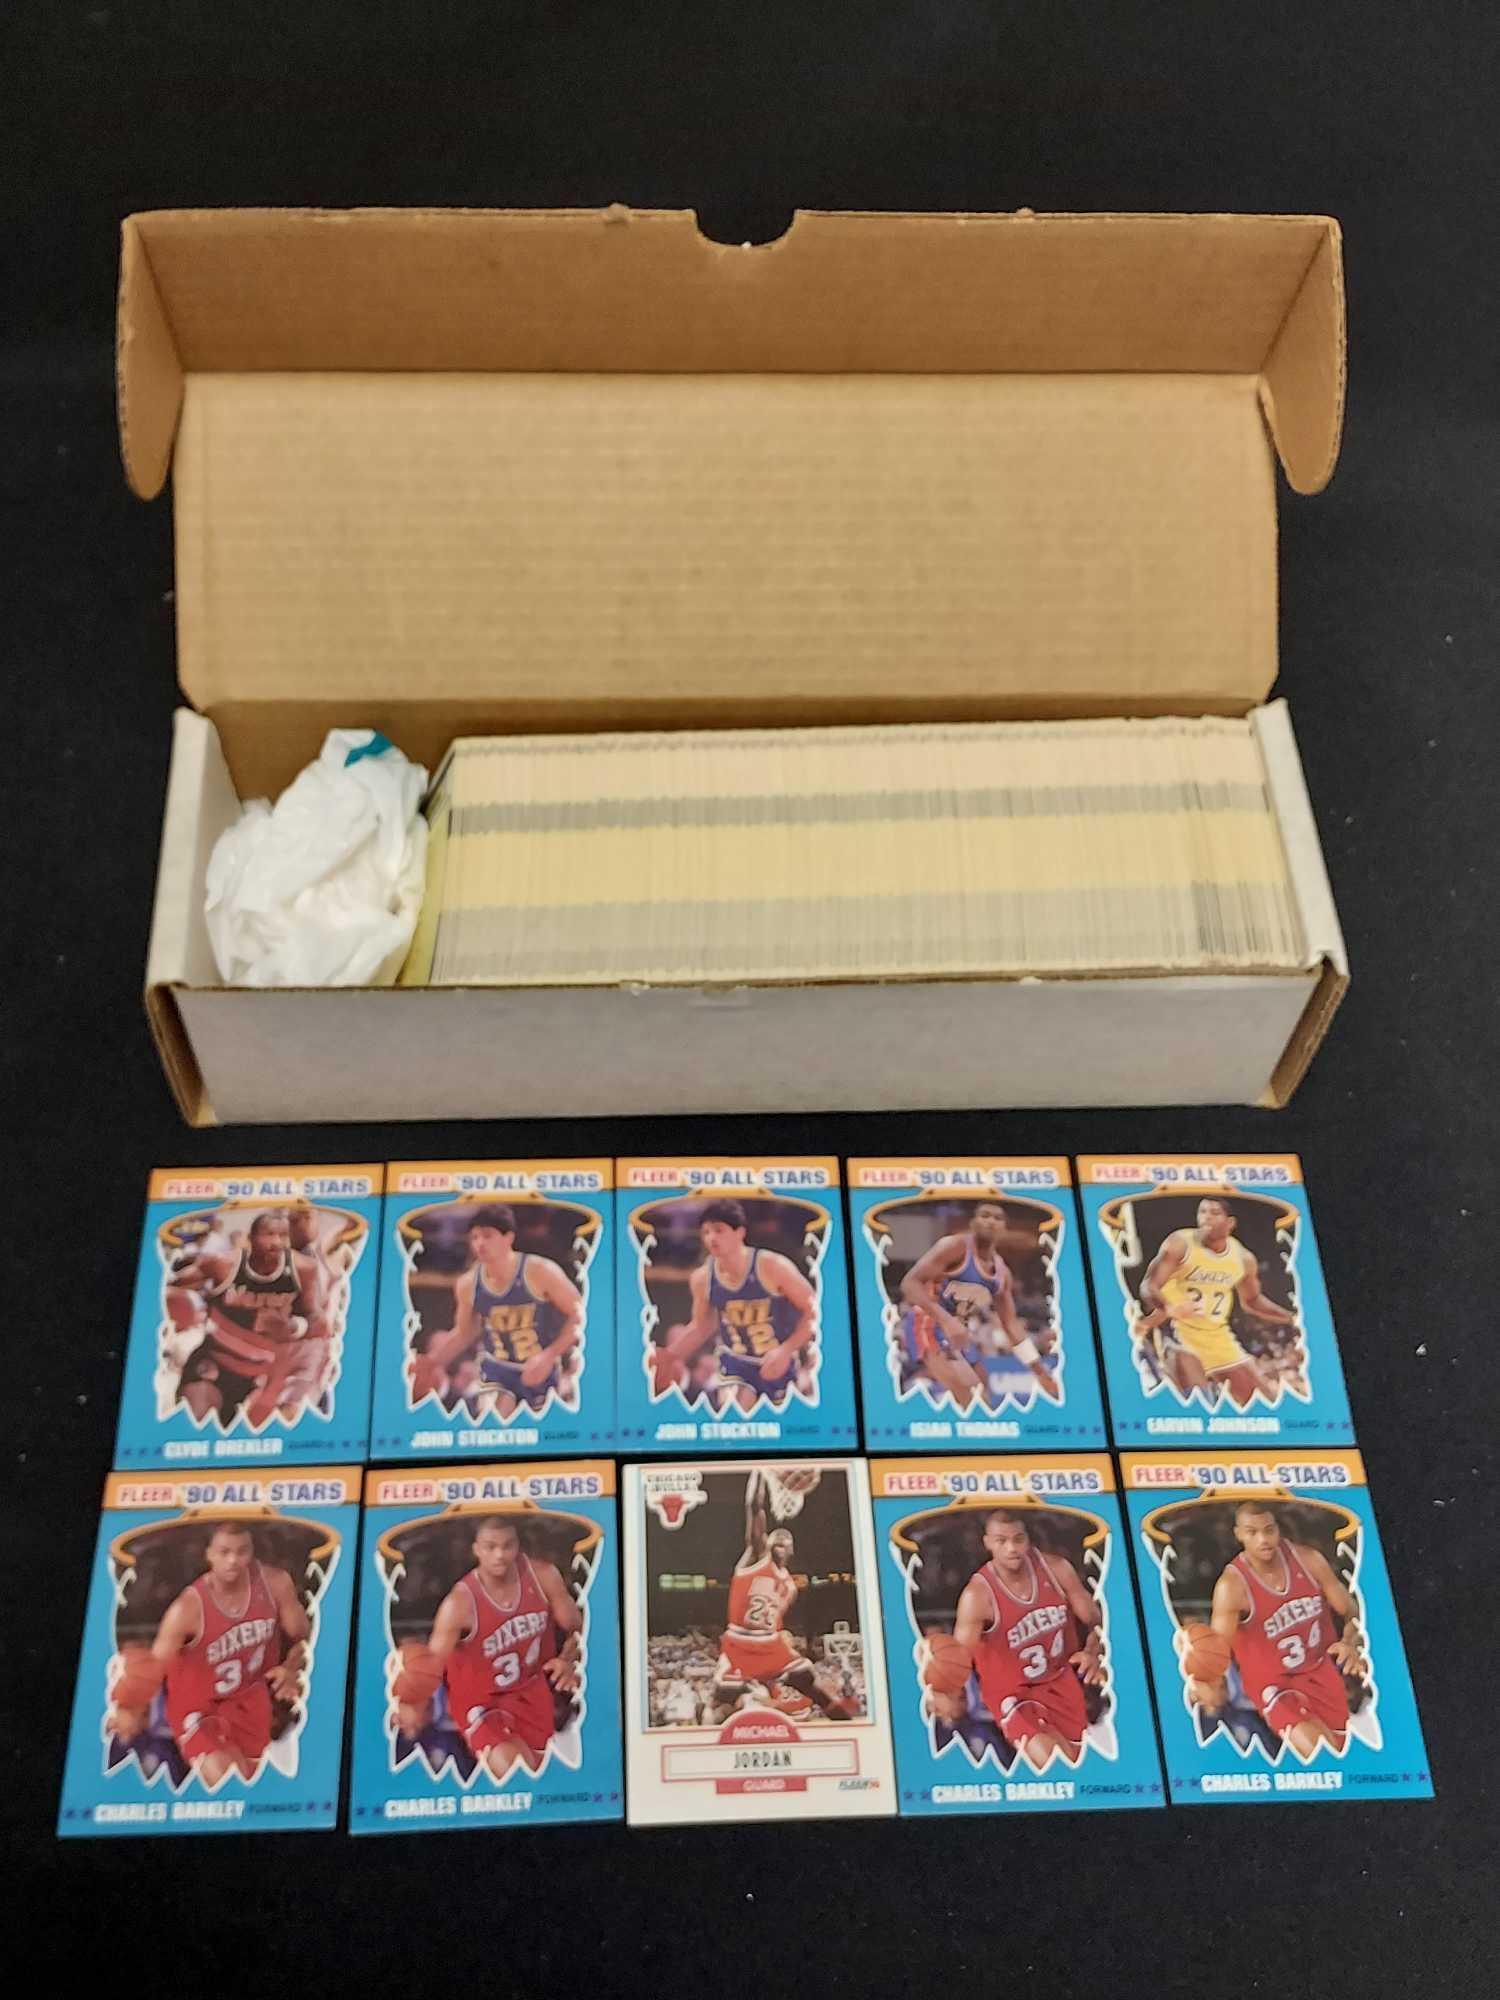 Assortment of Mostly Basketball Cards, Some Baseball - Various Brands & Years